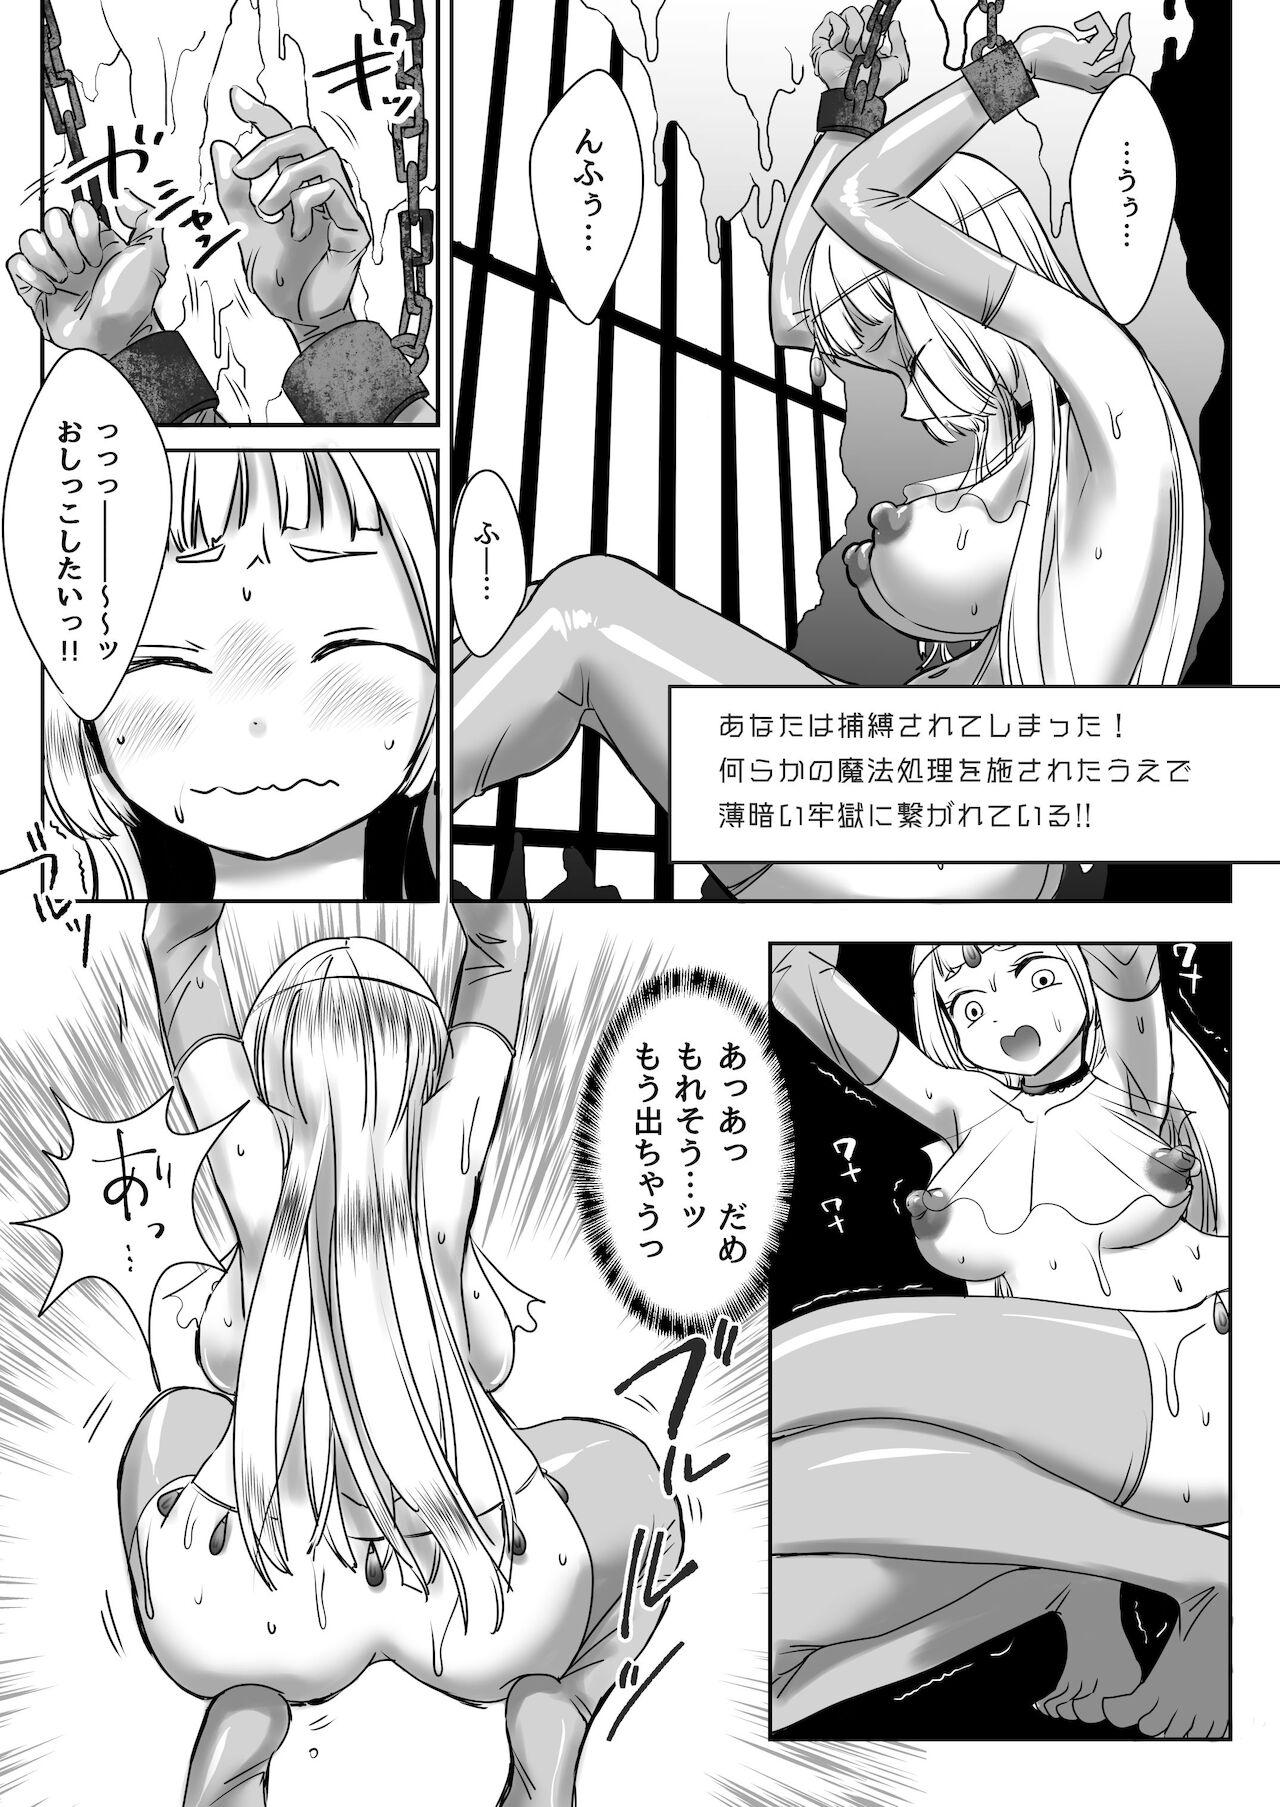 First Time C99 VR Doujin Eroge Reminiscence Room - Original Pure 18 - Page 10